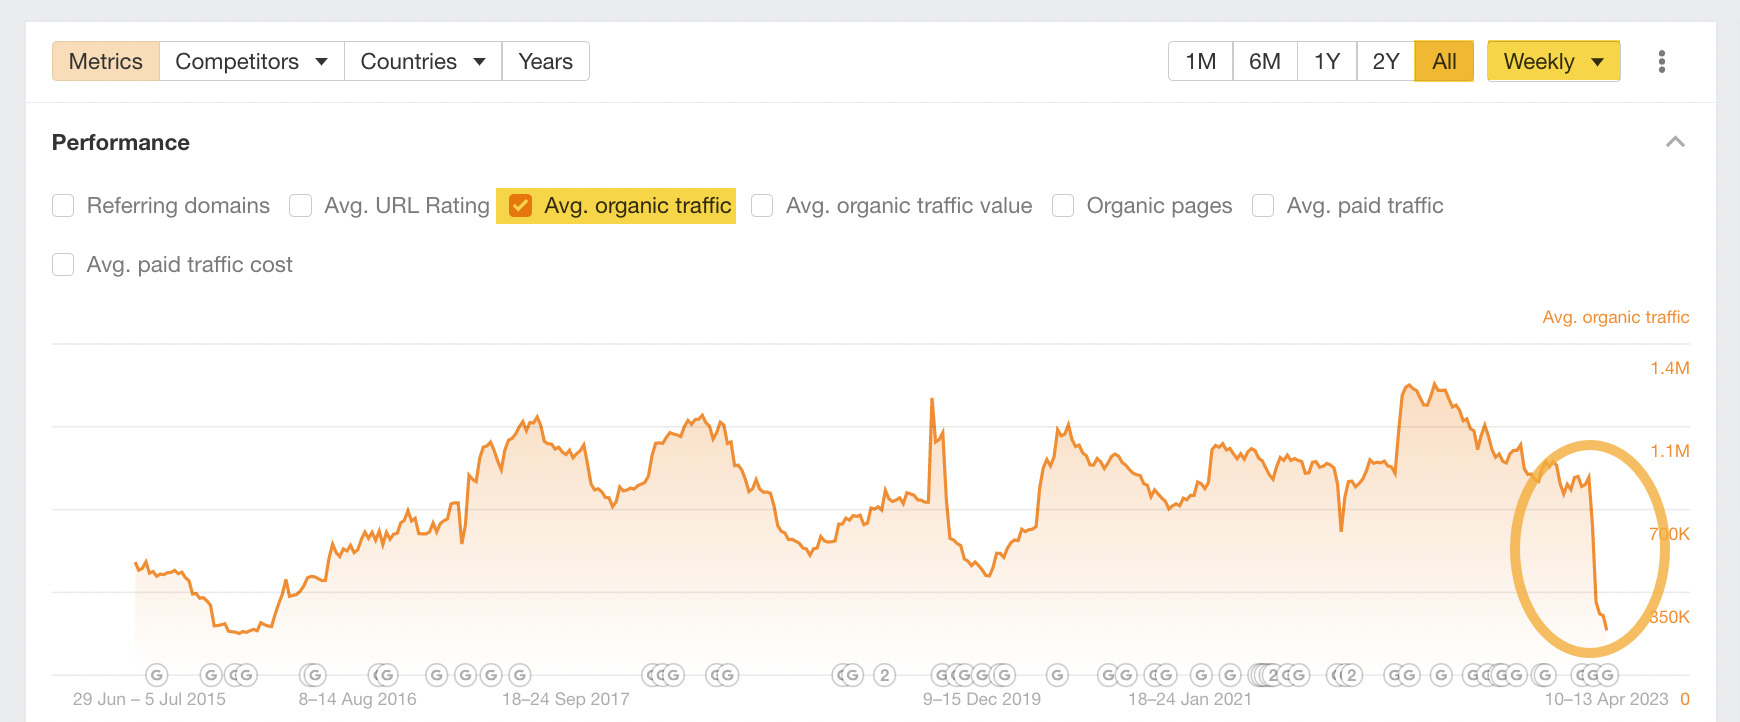 Avg. organic traffic filter with drop highlighted, via Ahrefs' Site Explorer